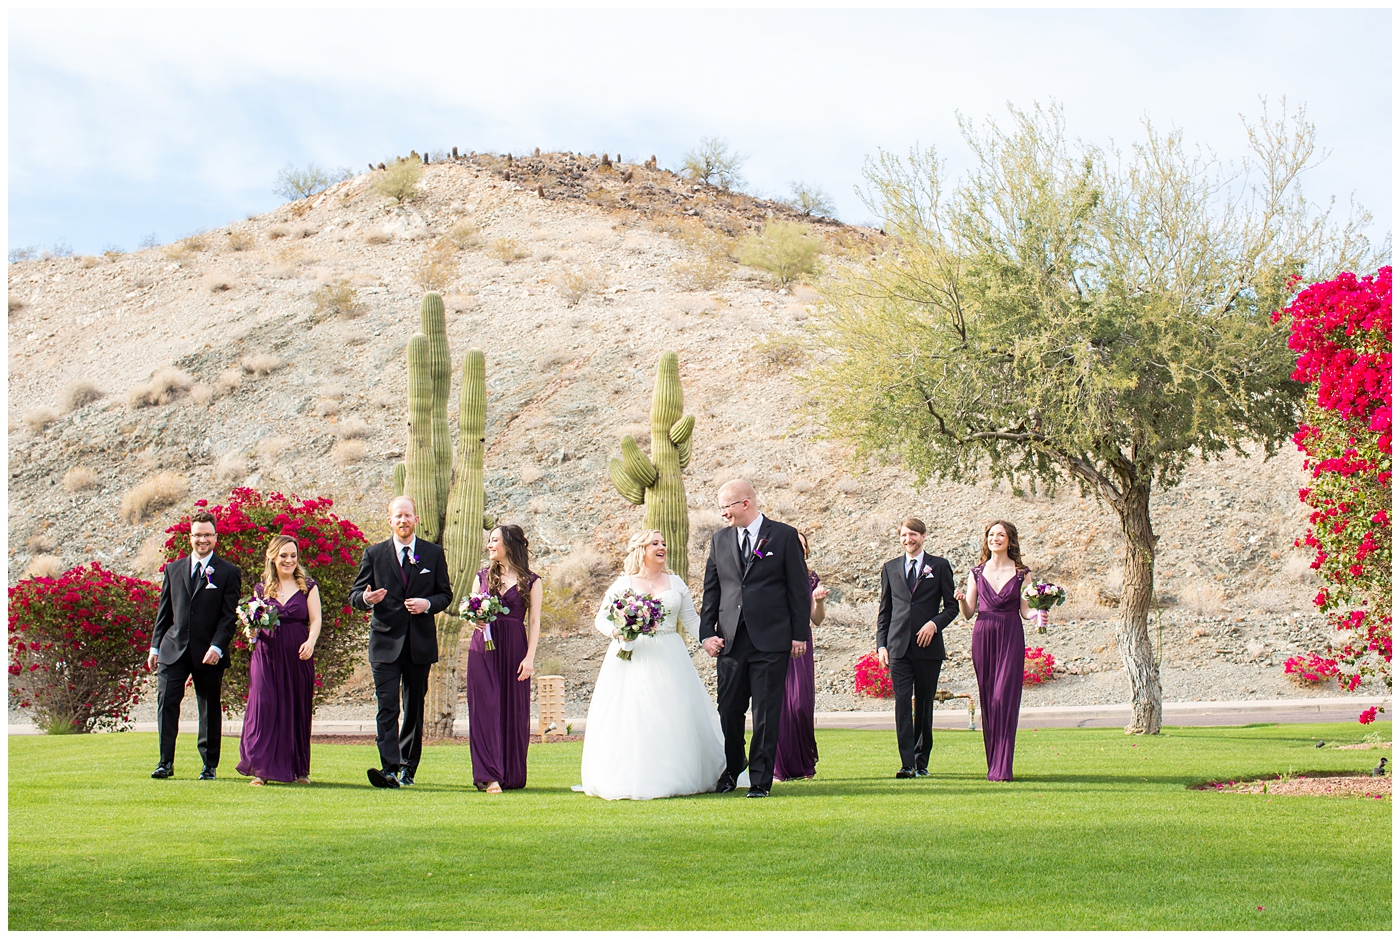 blonde bride in long sleeve wedding dress with purple and white flower bouquet with bridesmaids in plum dresses with groom in black suit with purple calla lilly boutonniere with groomsmen in black suits with plum vests on wedding day bridal party portrait